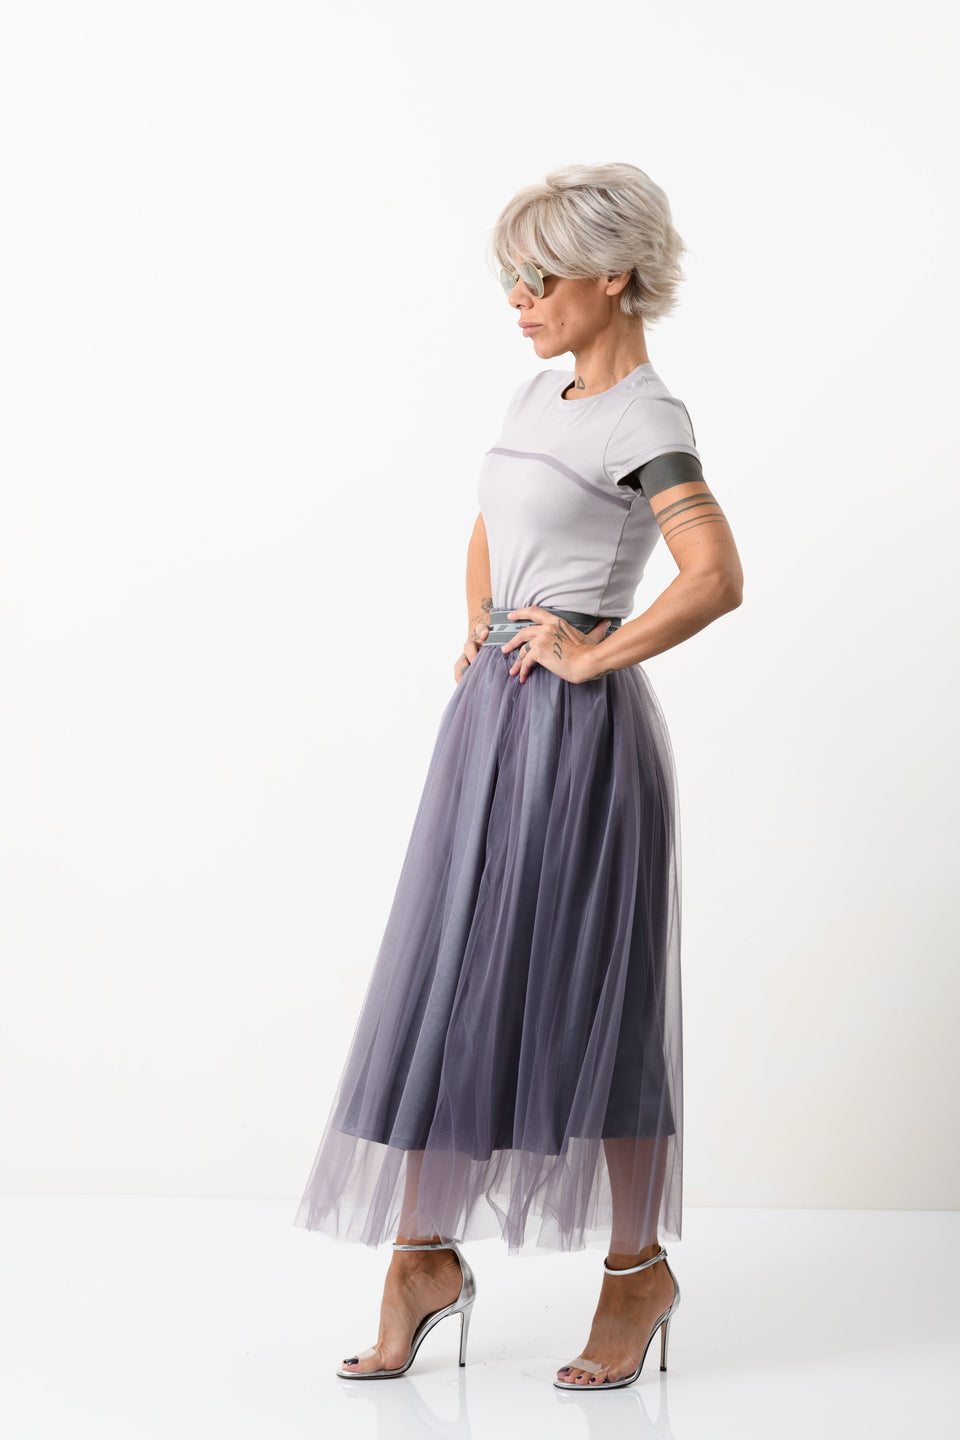 TULLE SKIRT + LILAC TOP OUTFIT SET